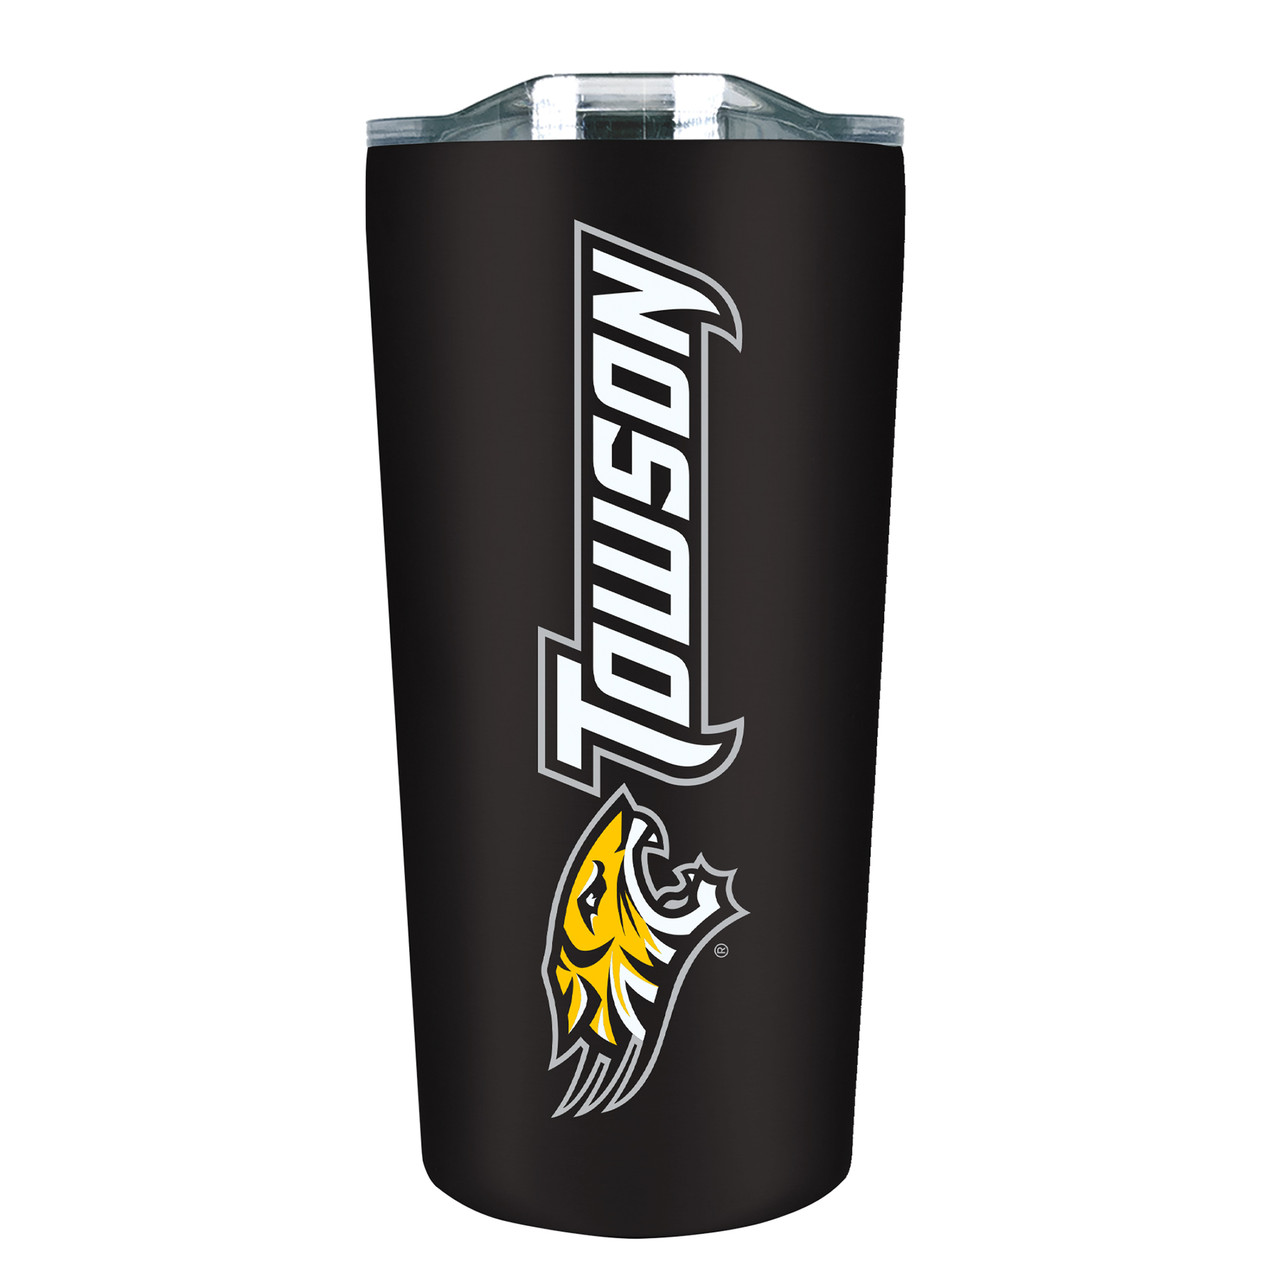 Towson University Tigers - 18oz Stainless Soft Touch Tumbler - Black